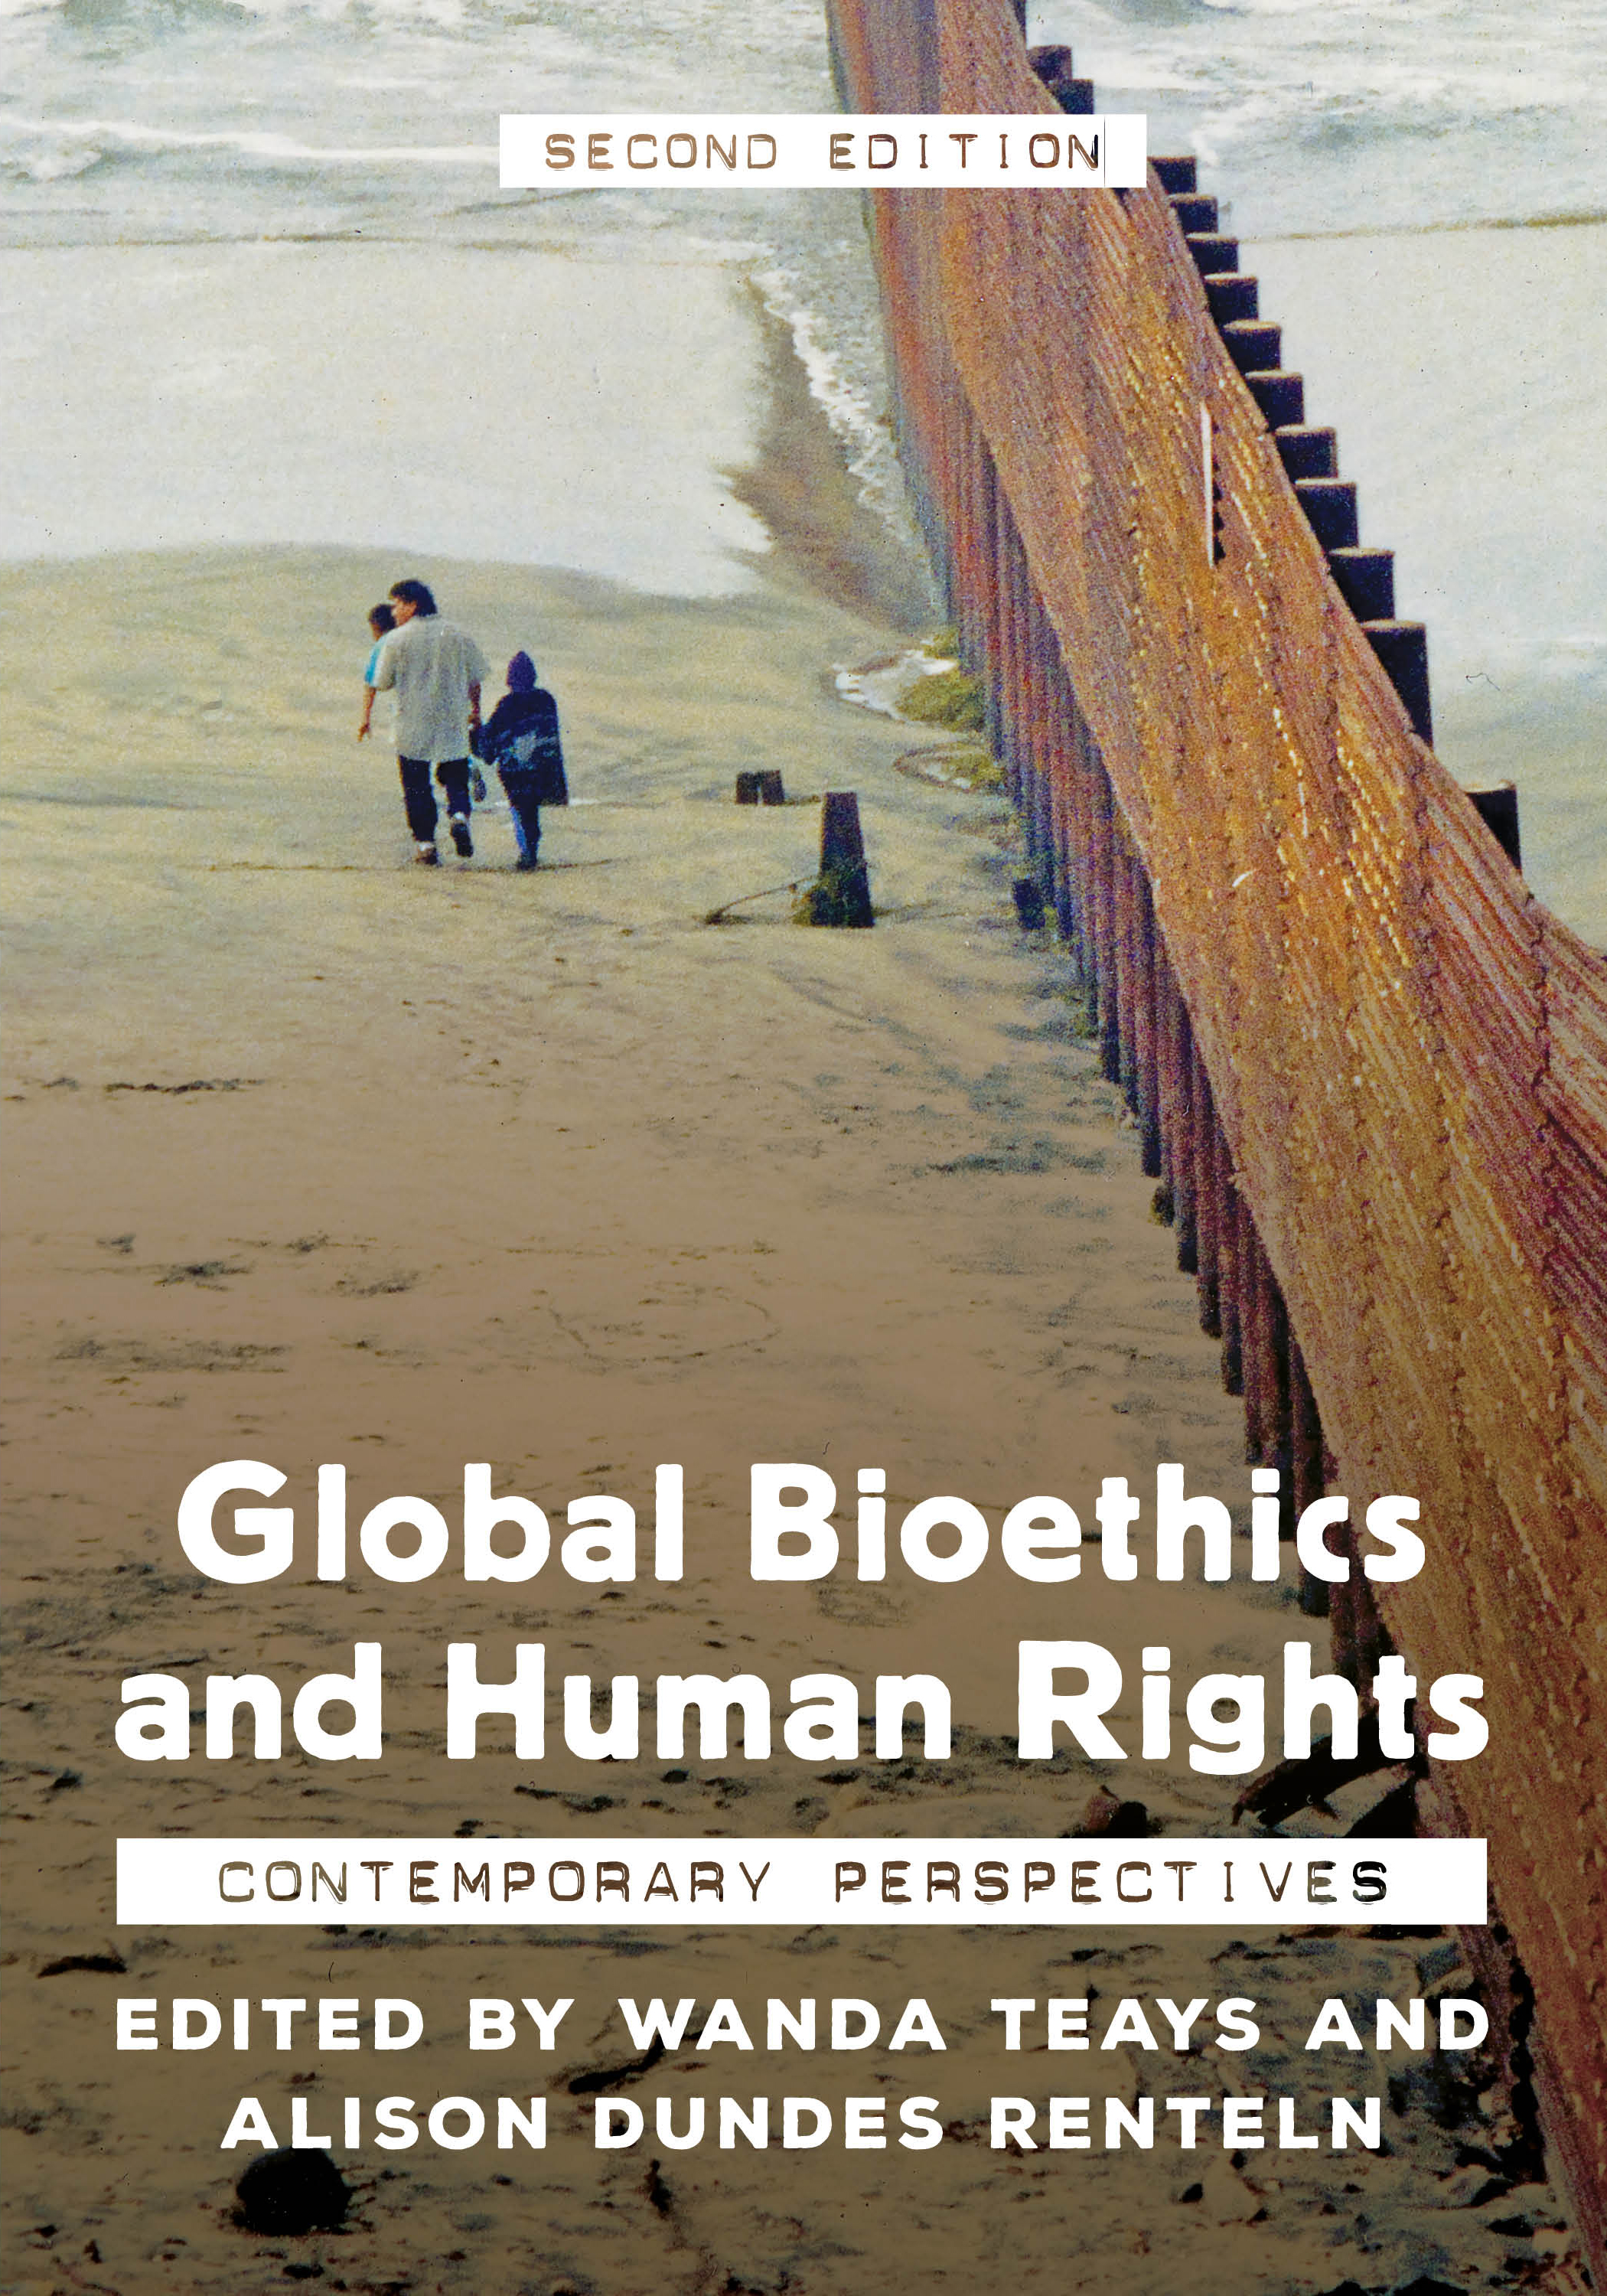 Global Bioethics and Human Rights: Contemporary Perspectives